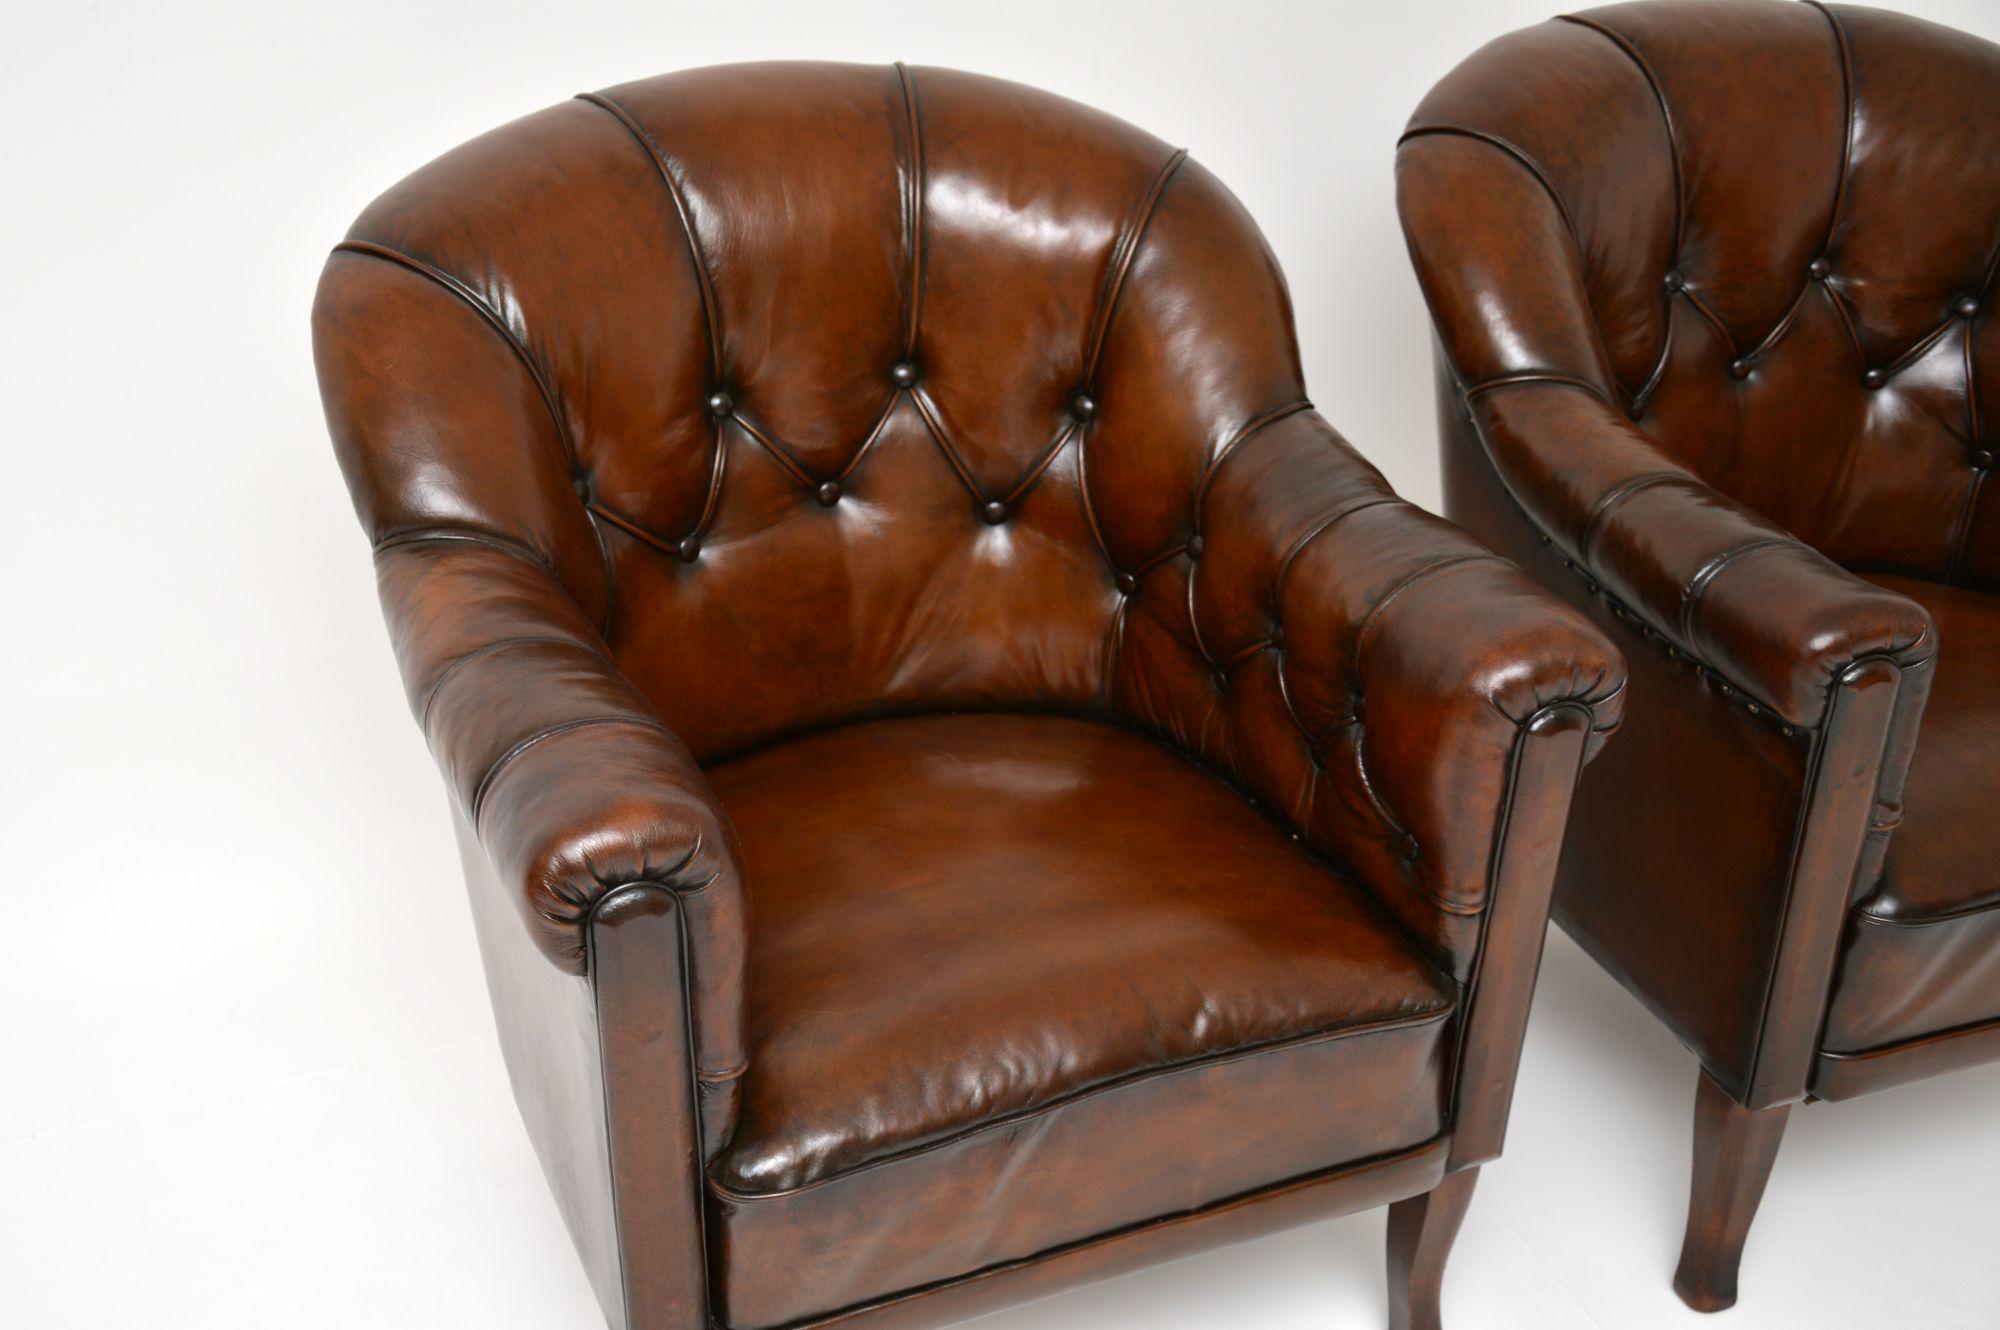 Pair of Antique Swedish Leather Armchairs 1